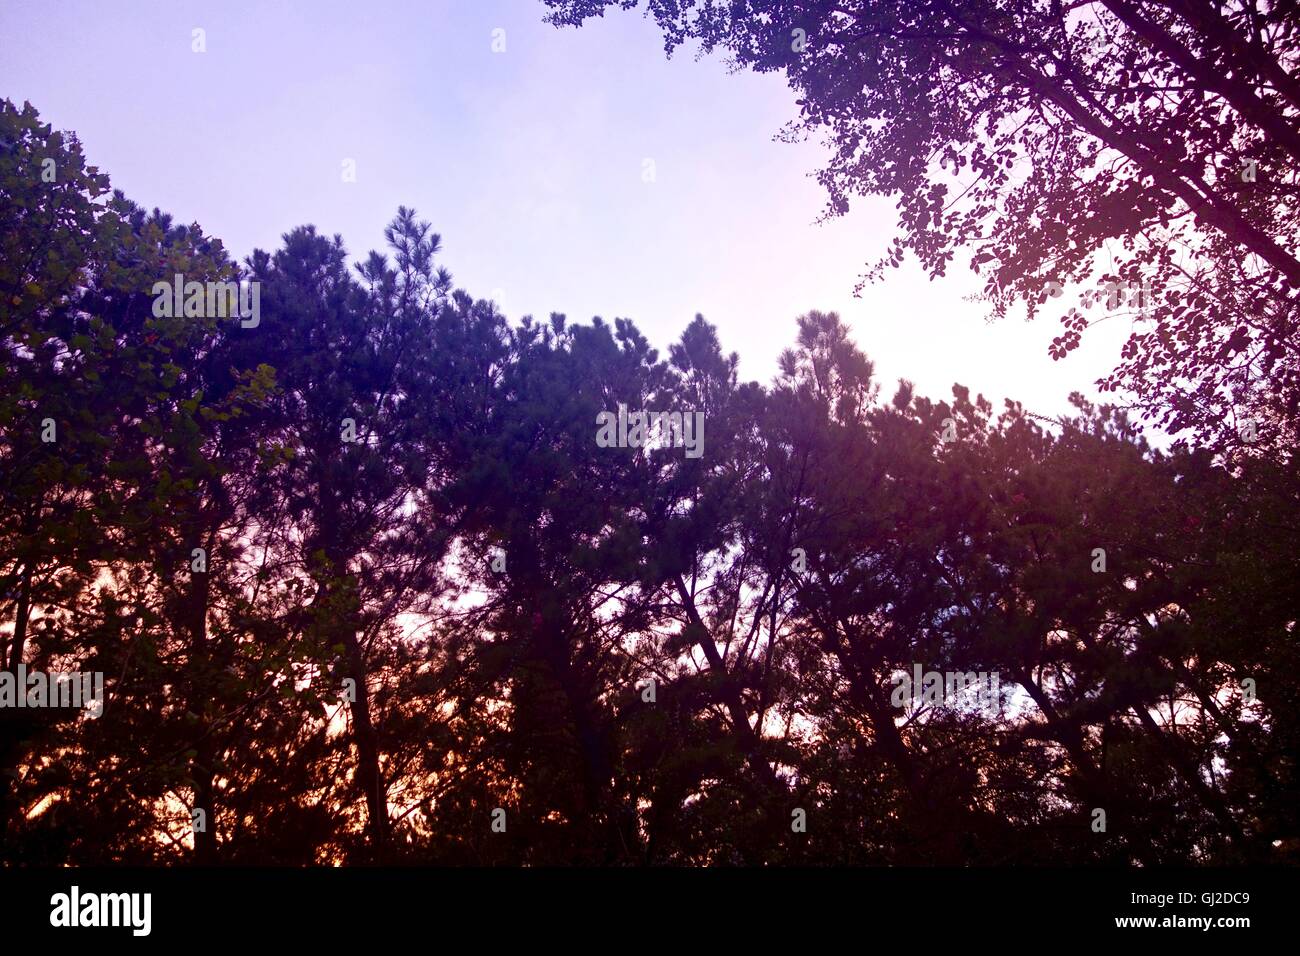 Looking up into a tree canopy in a forest, at sunset. Stock Photo